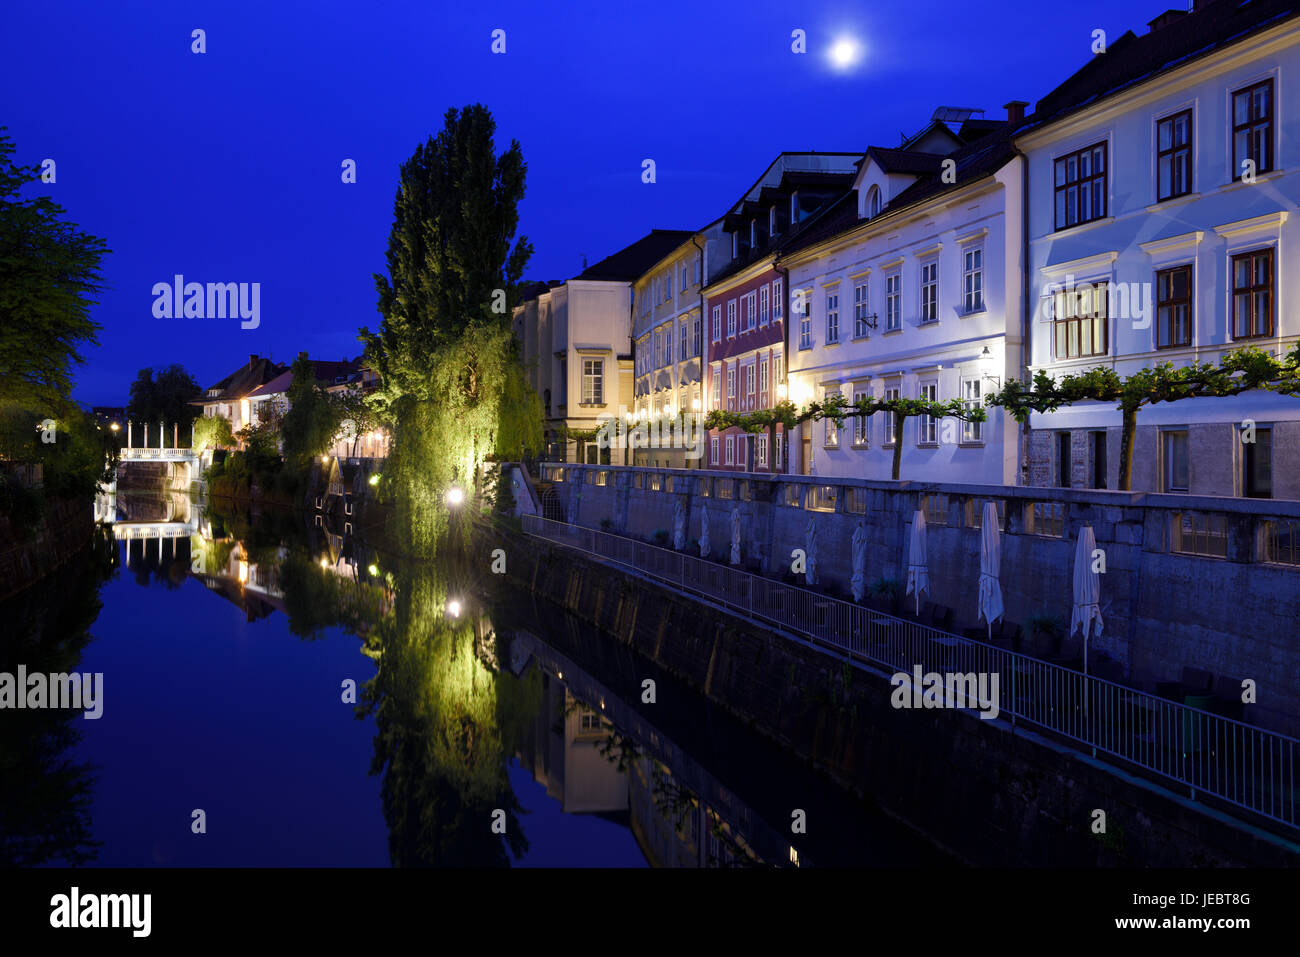 Cobblers Bridge and houses reflected on the calm Ljubljanica river canal in moonlight at dawn in Ljubljana Slovenia Stock Photo